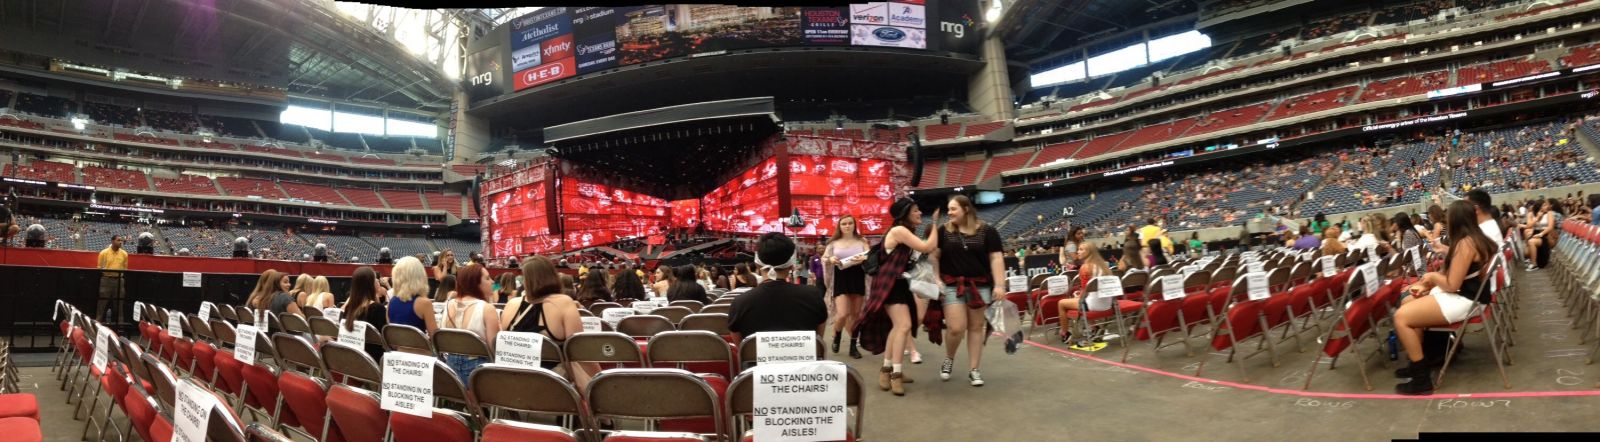 field b3, row 9 seat view  for concert - nrg stadium